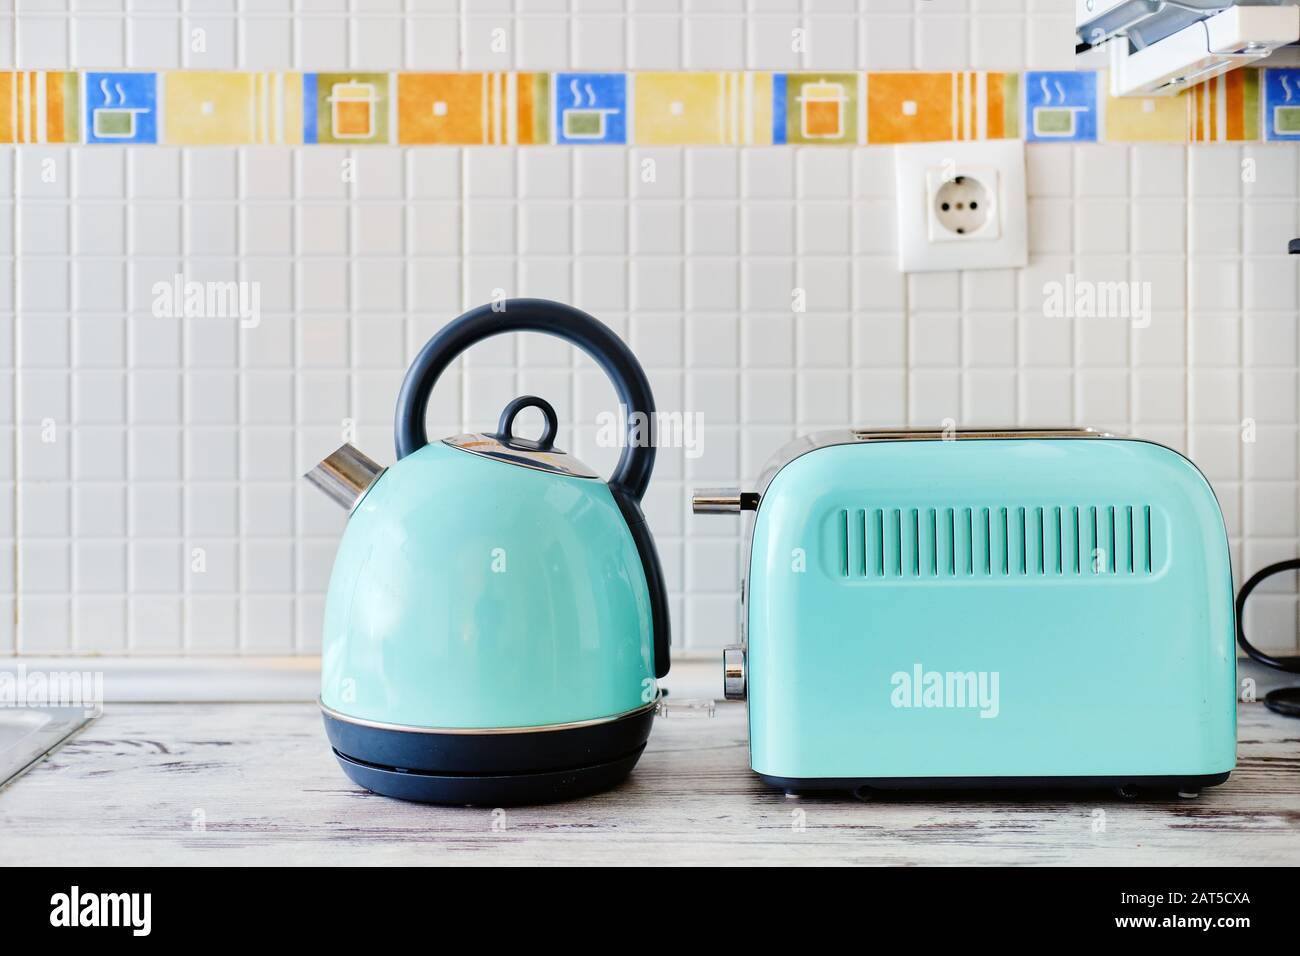 Close up view on work top two objects set, toaster electrical device for making toast and electric kettle electrical modern appliances menthol color Stock Photo